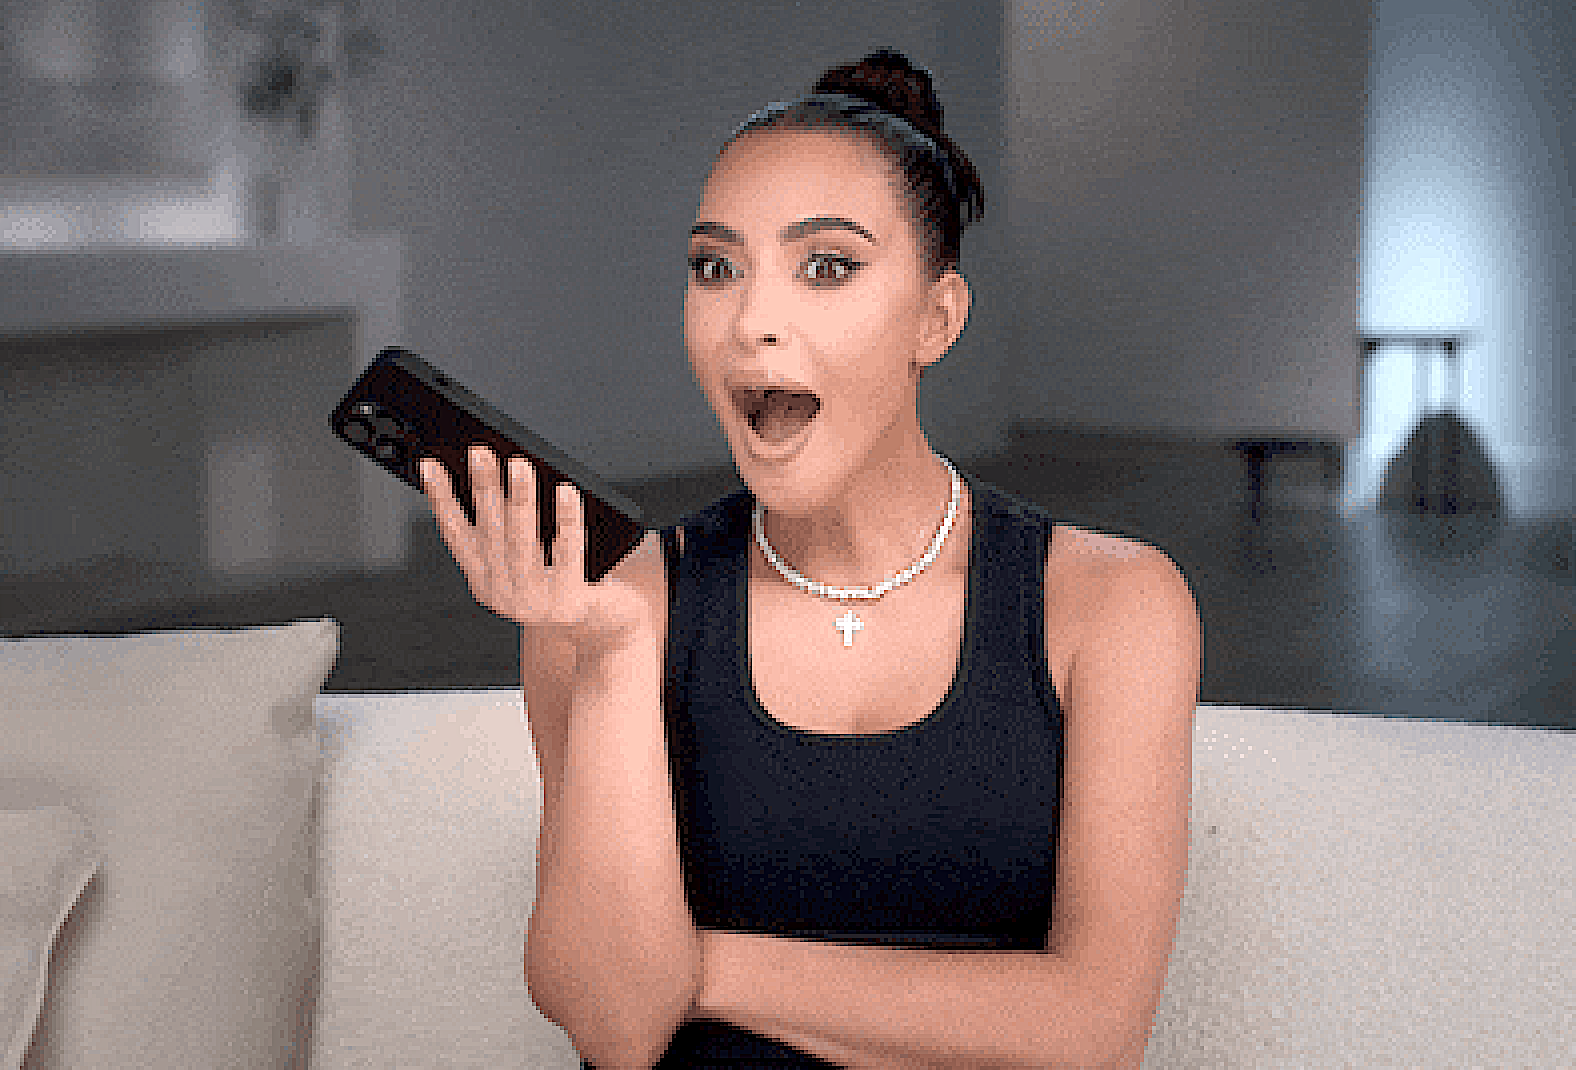 Kim K holding a phone with her mouth open in shock